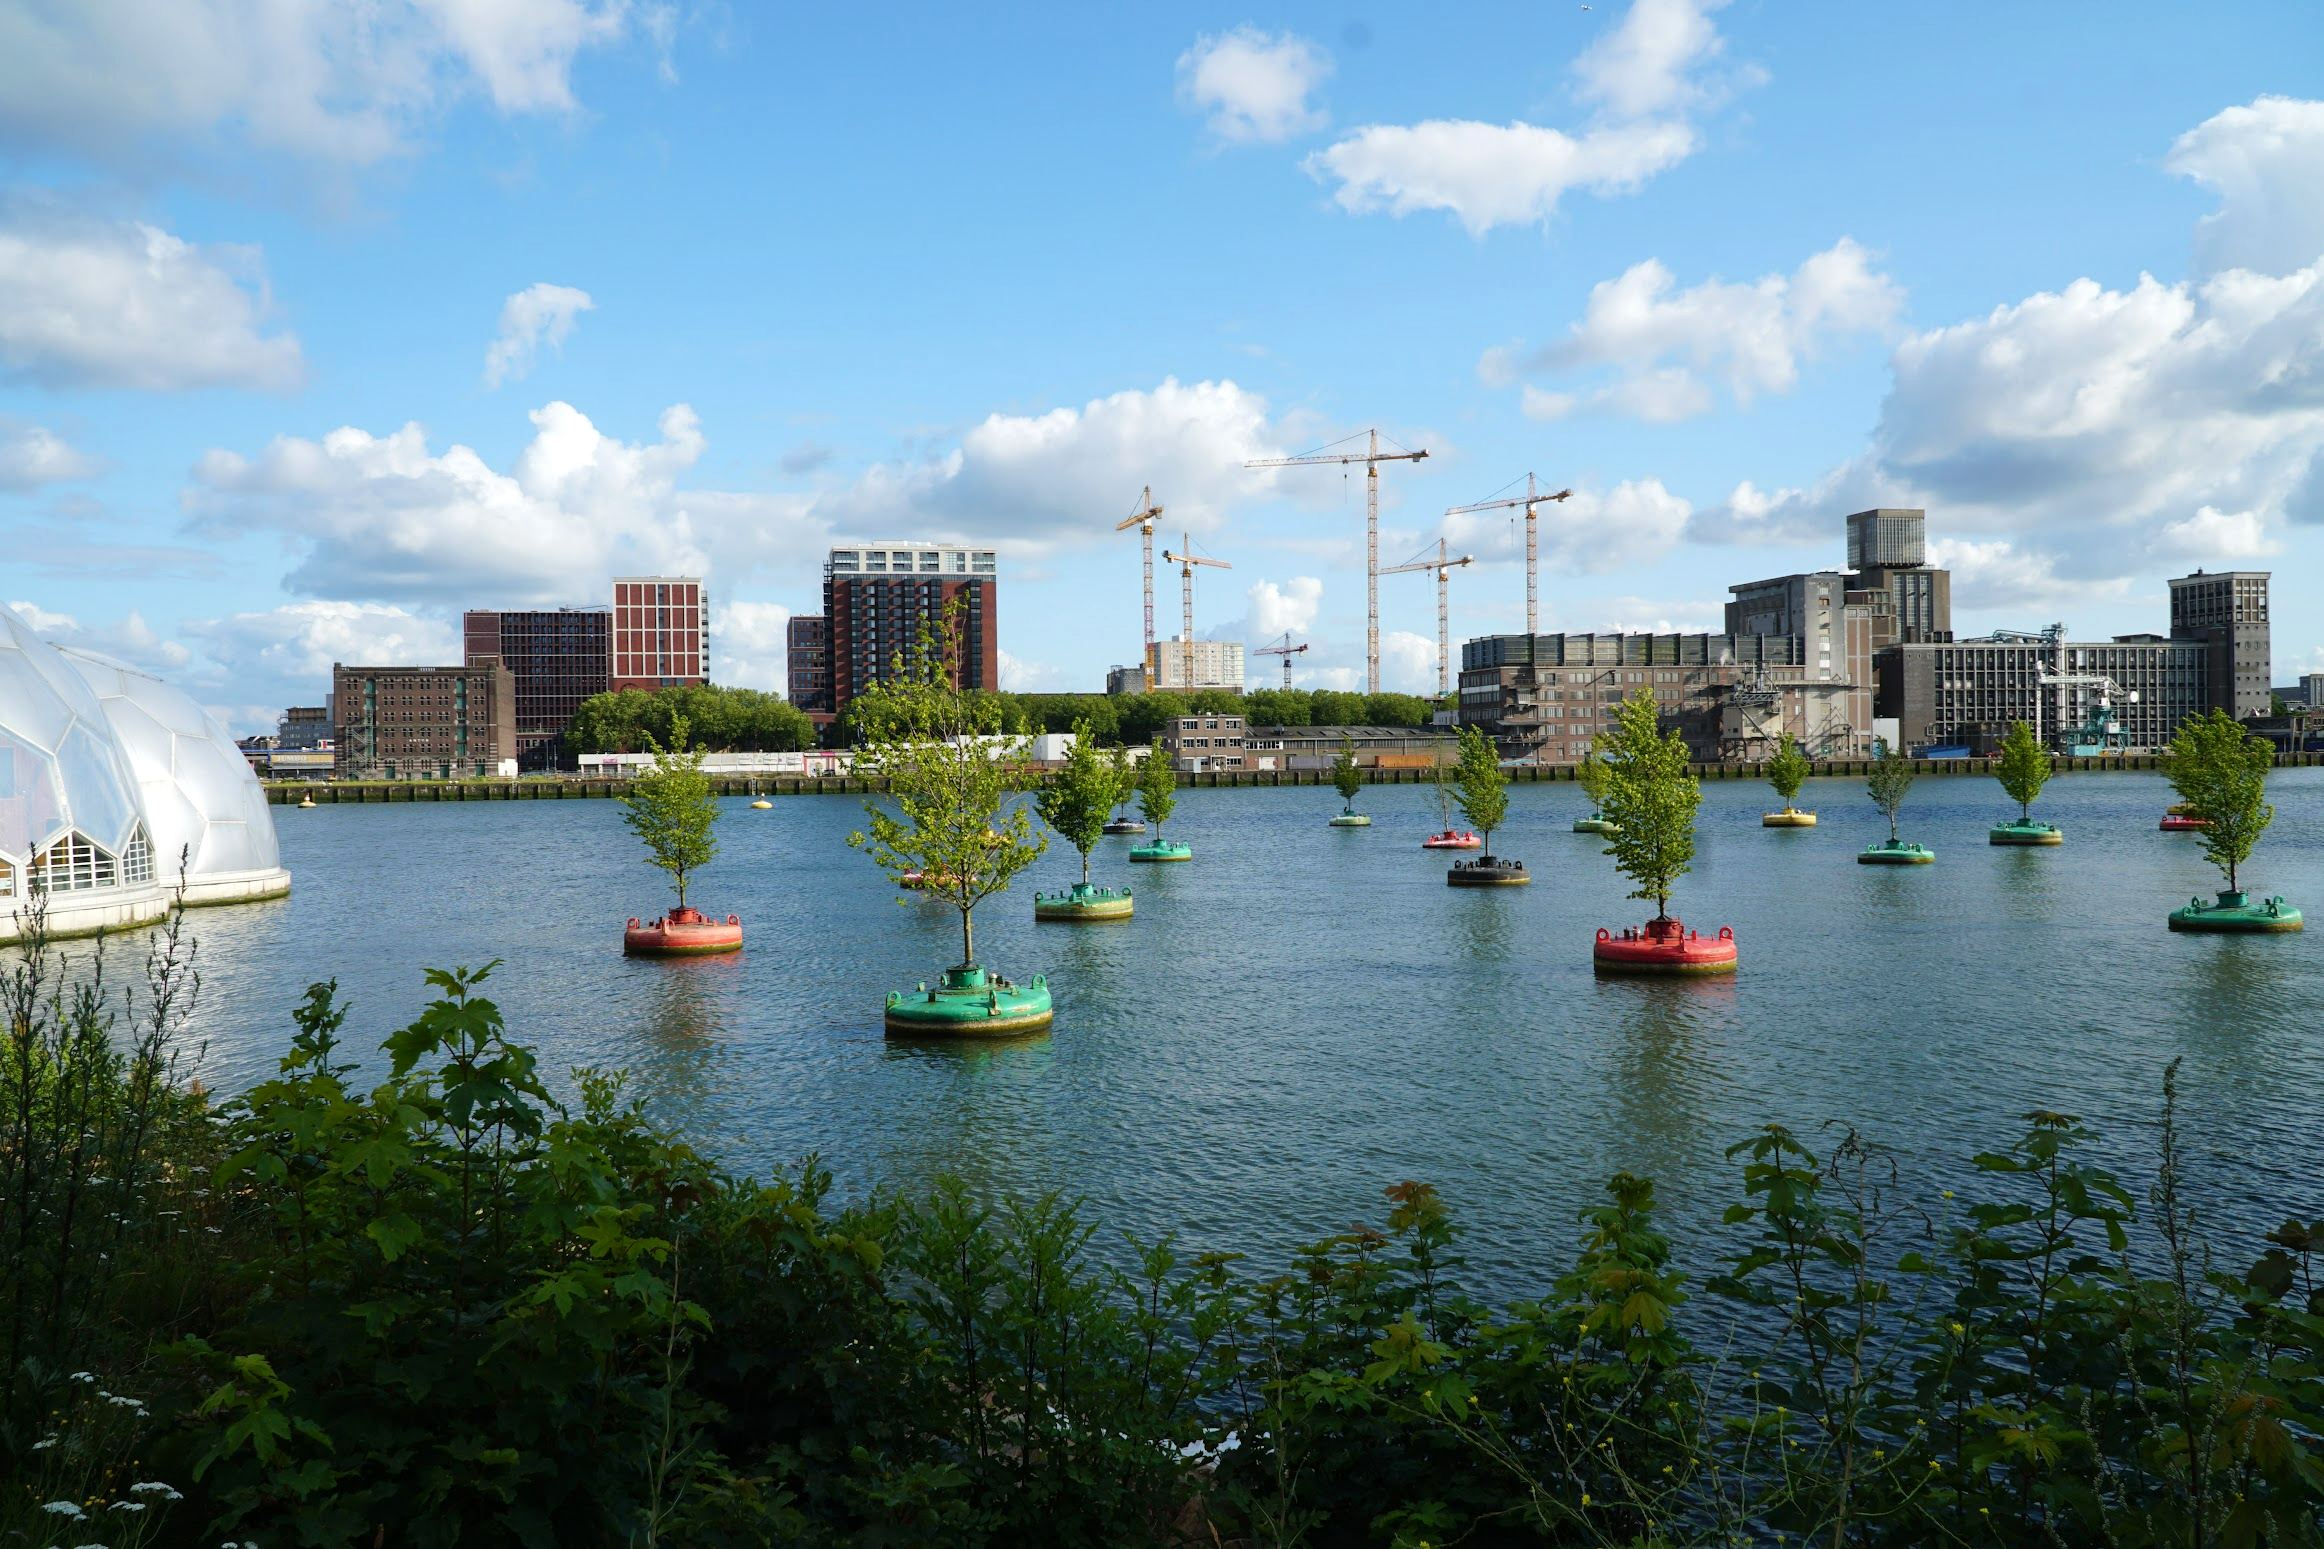 Floating trees in Rotterdam, The Netherlands